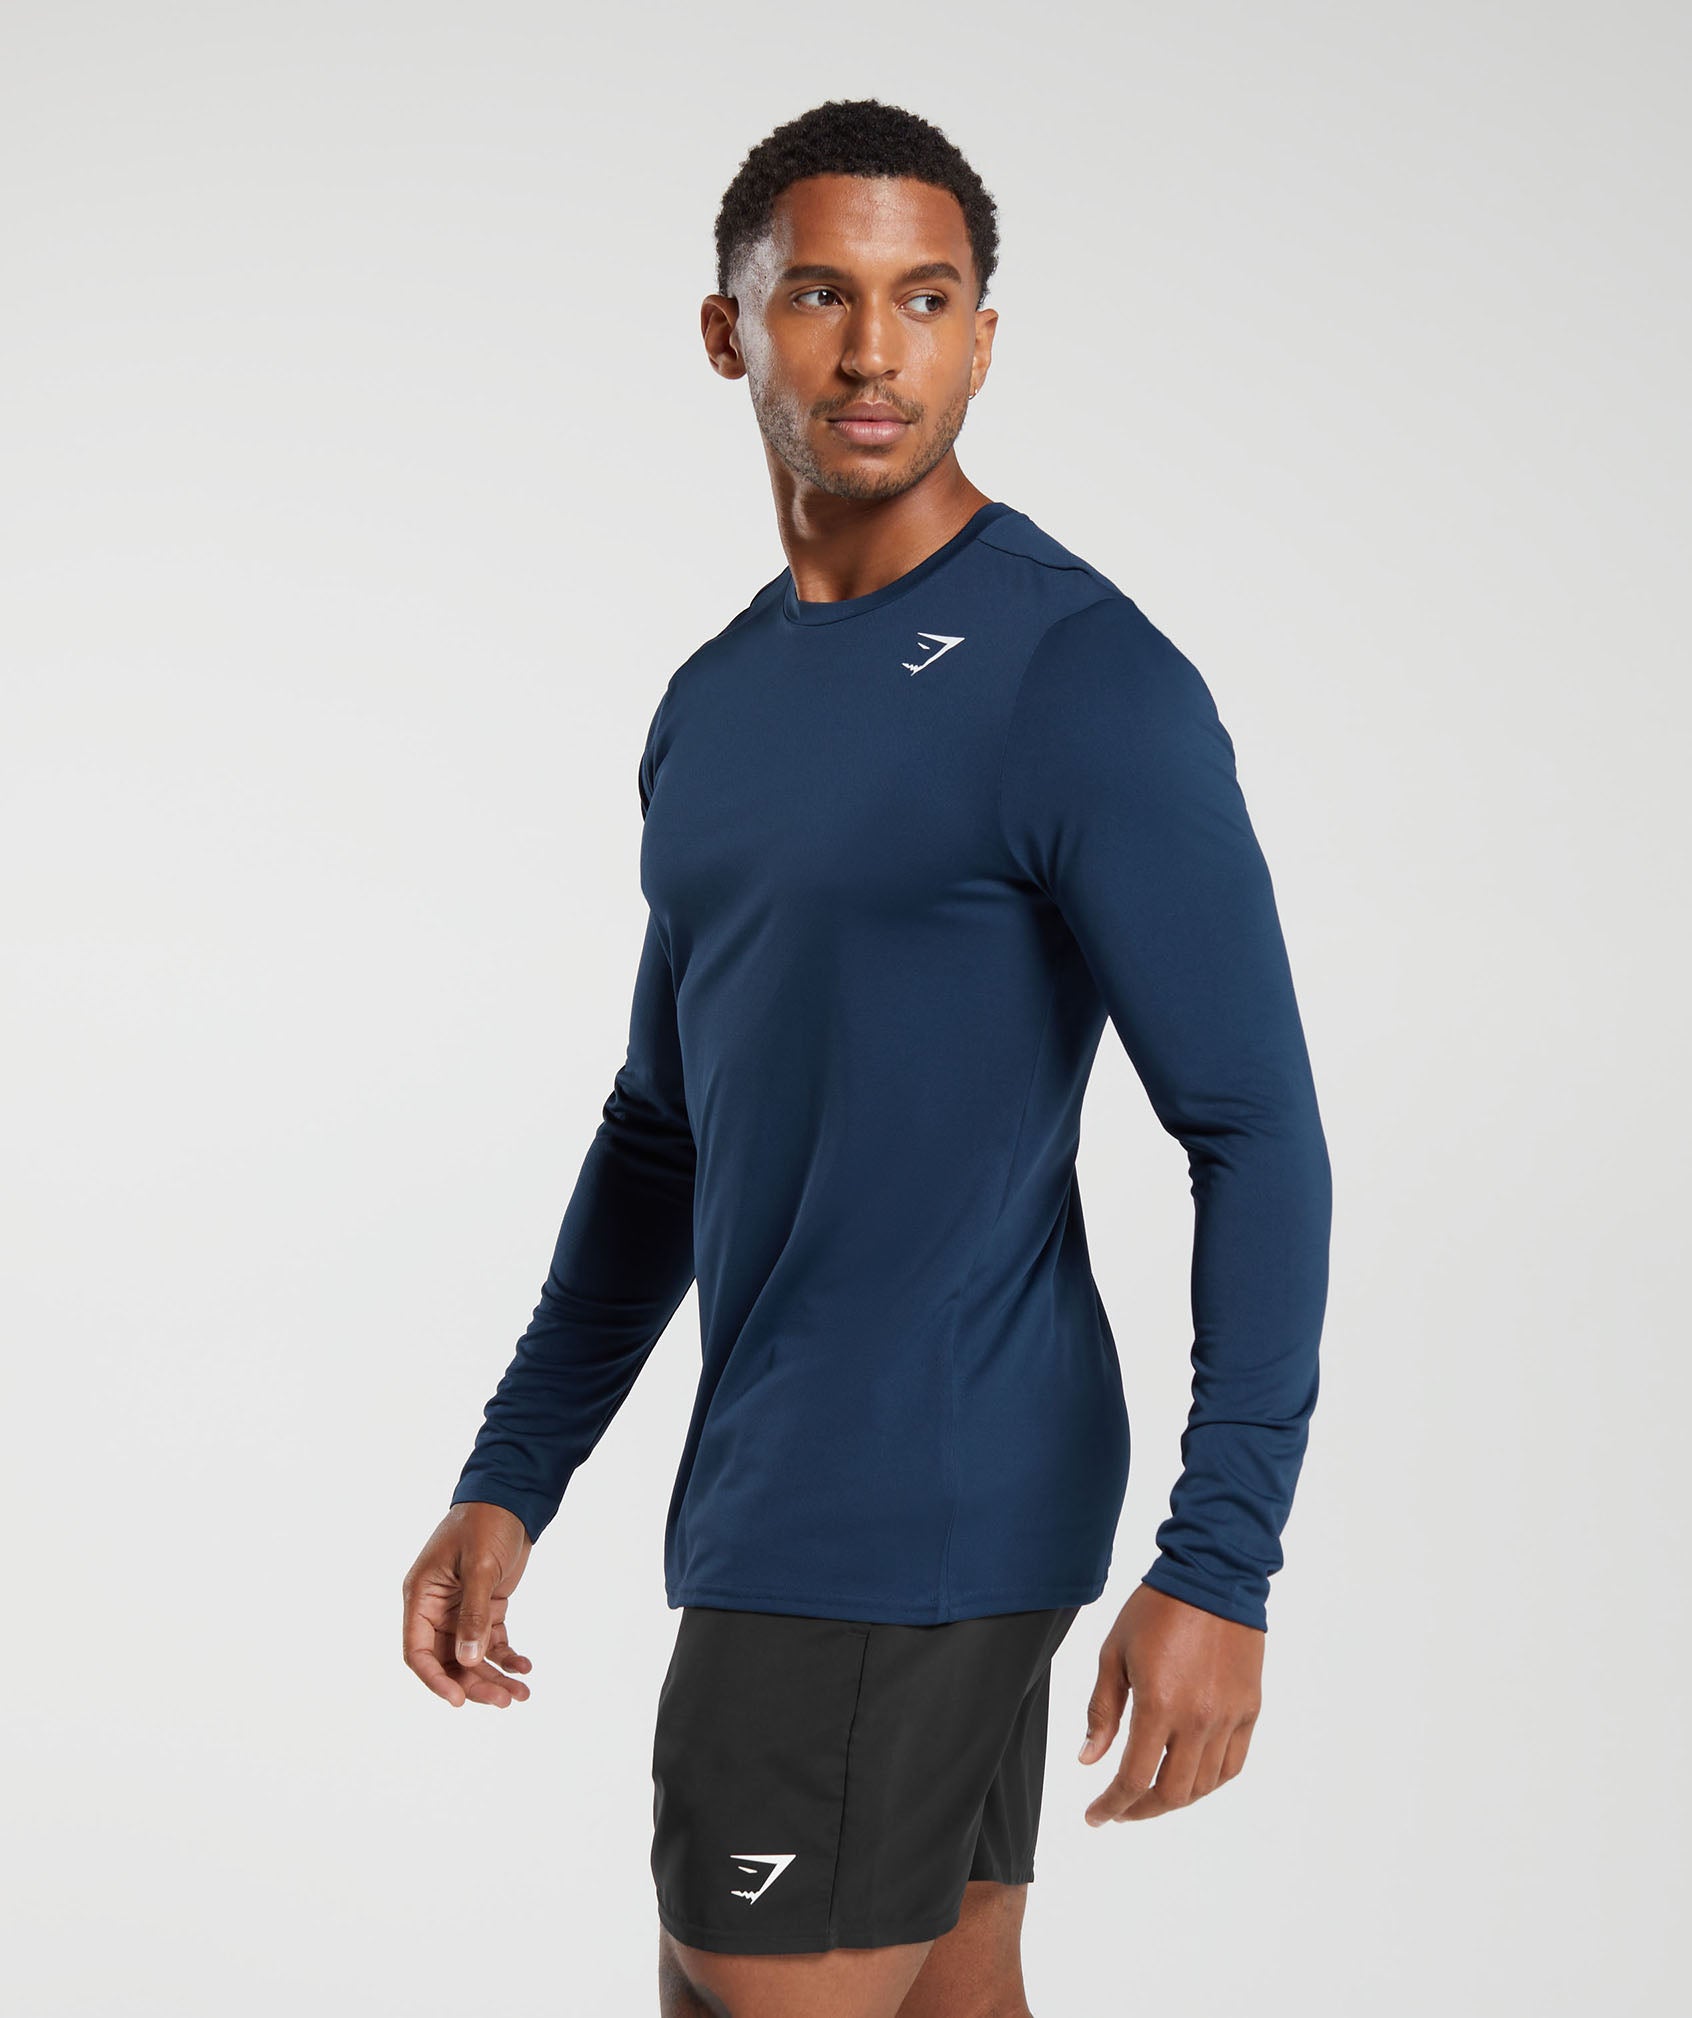 Arrival Long Sleeve T-Shirt in Navy - view 3